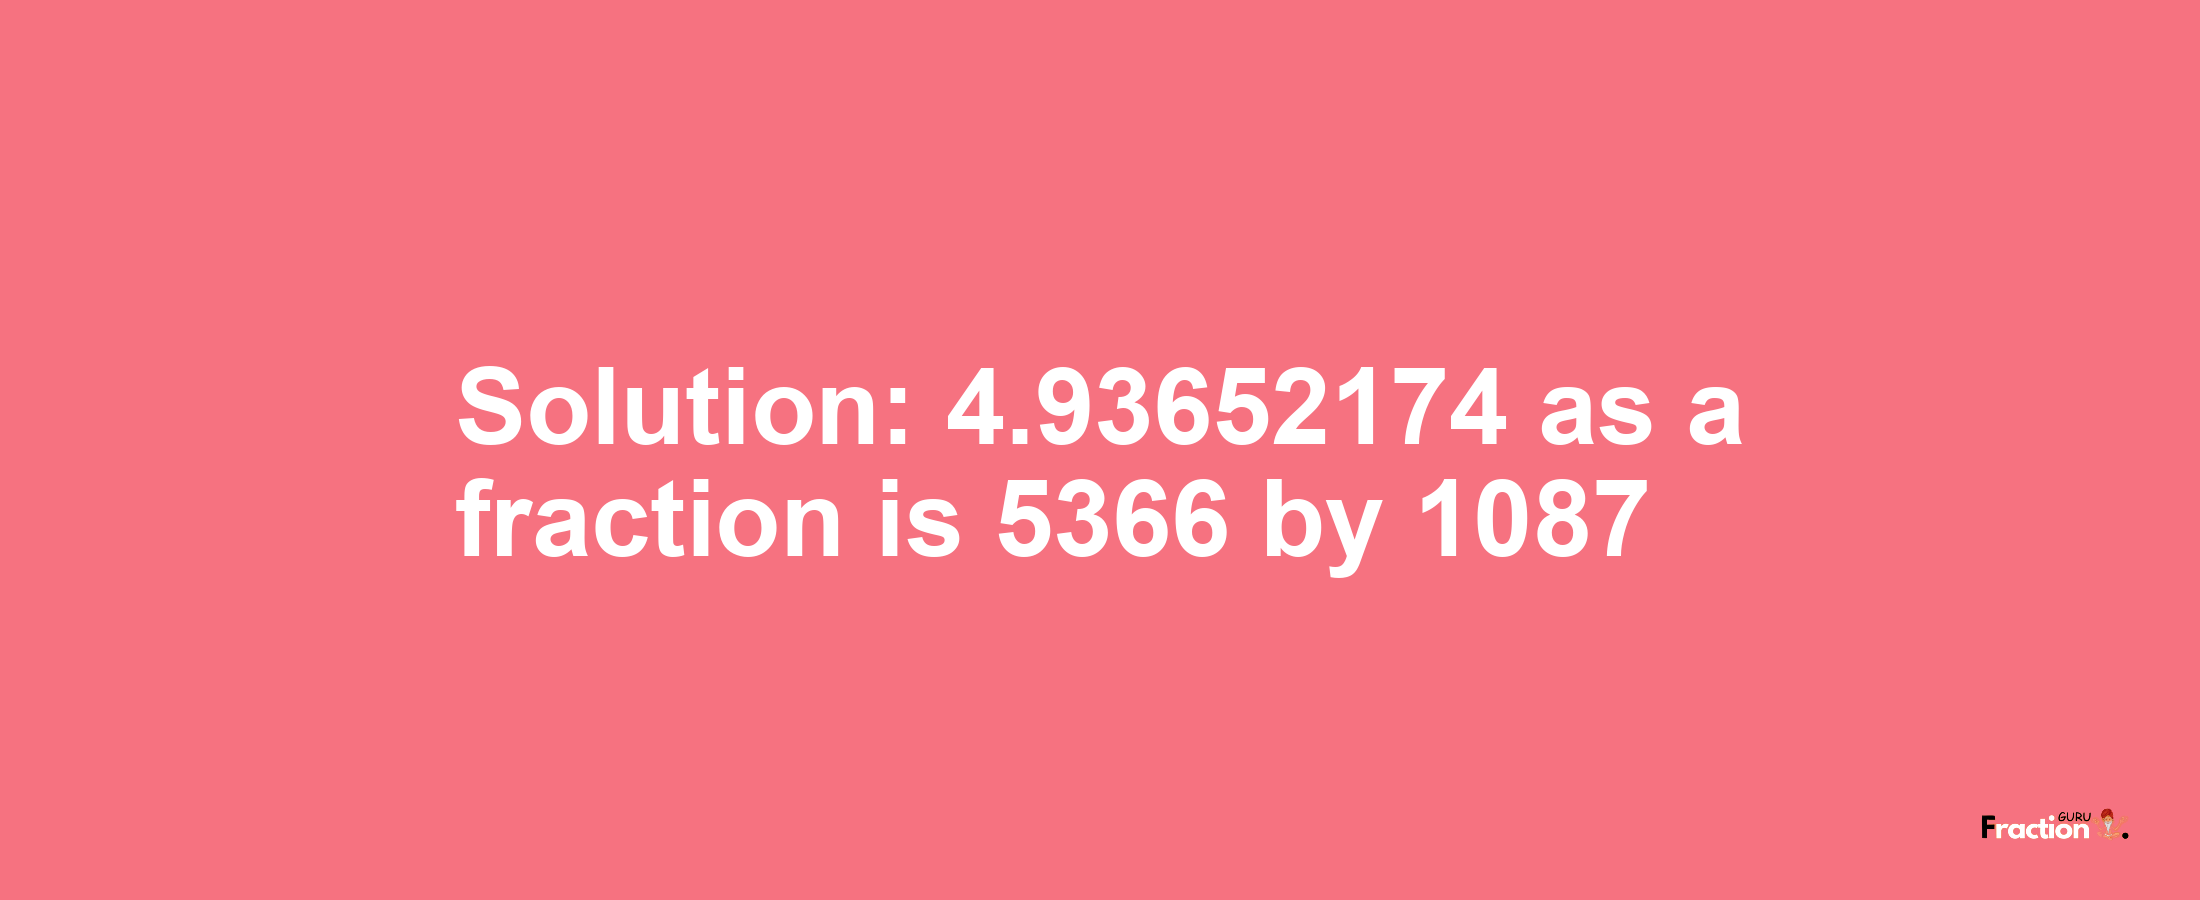 Solution:4.93652174 as a fraction is 5366/1087